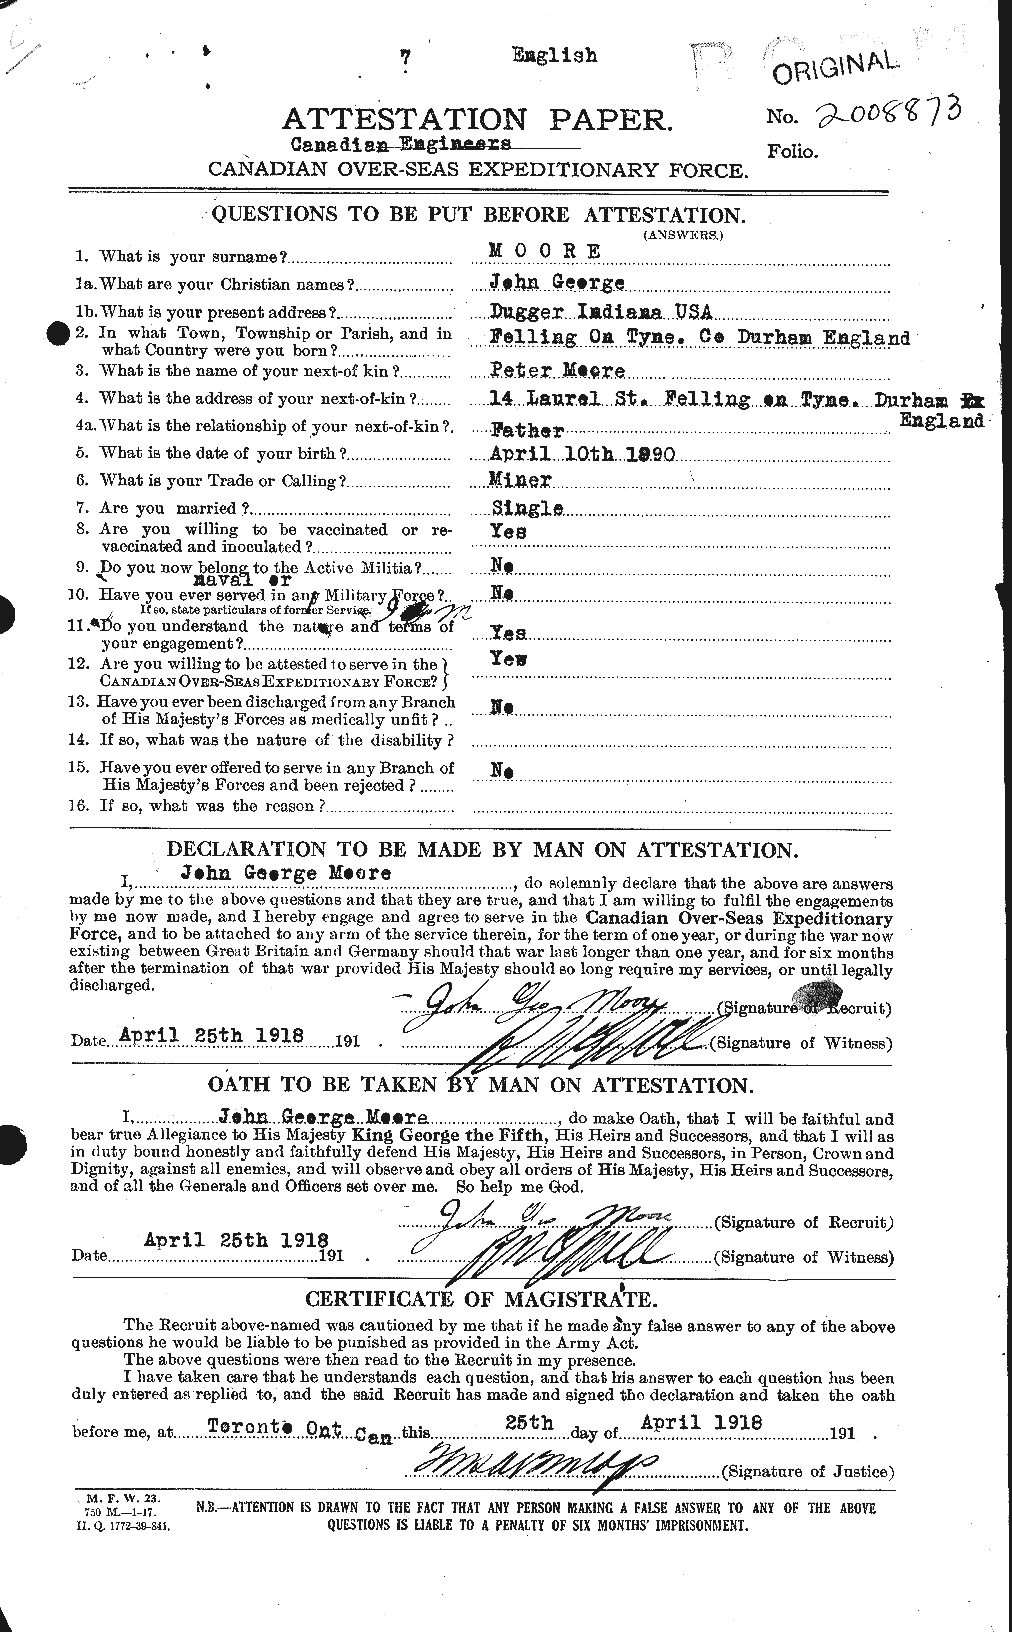 Personnel Records of the First World War - CEF 503291a